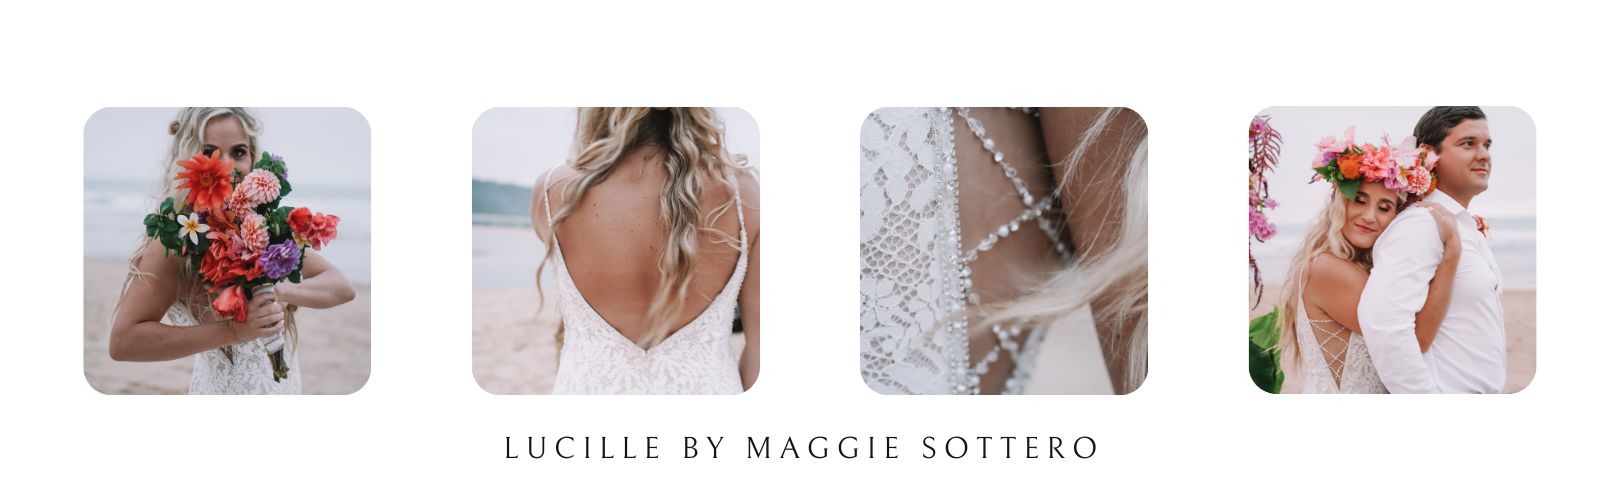 Lucille by Maggie Sottero